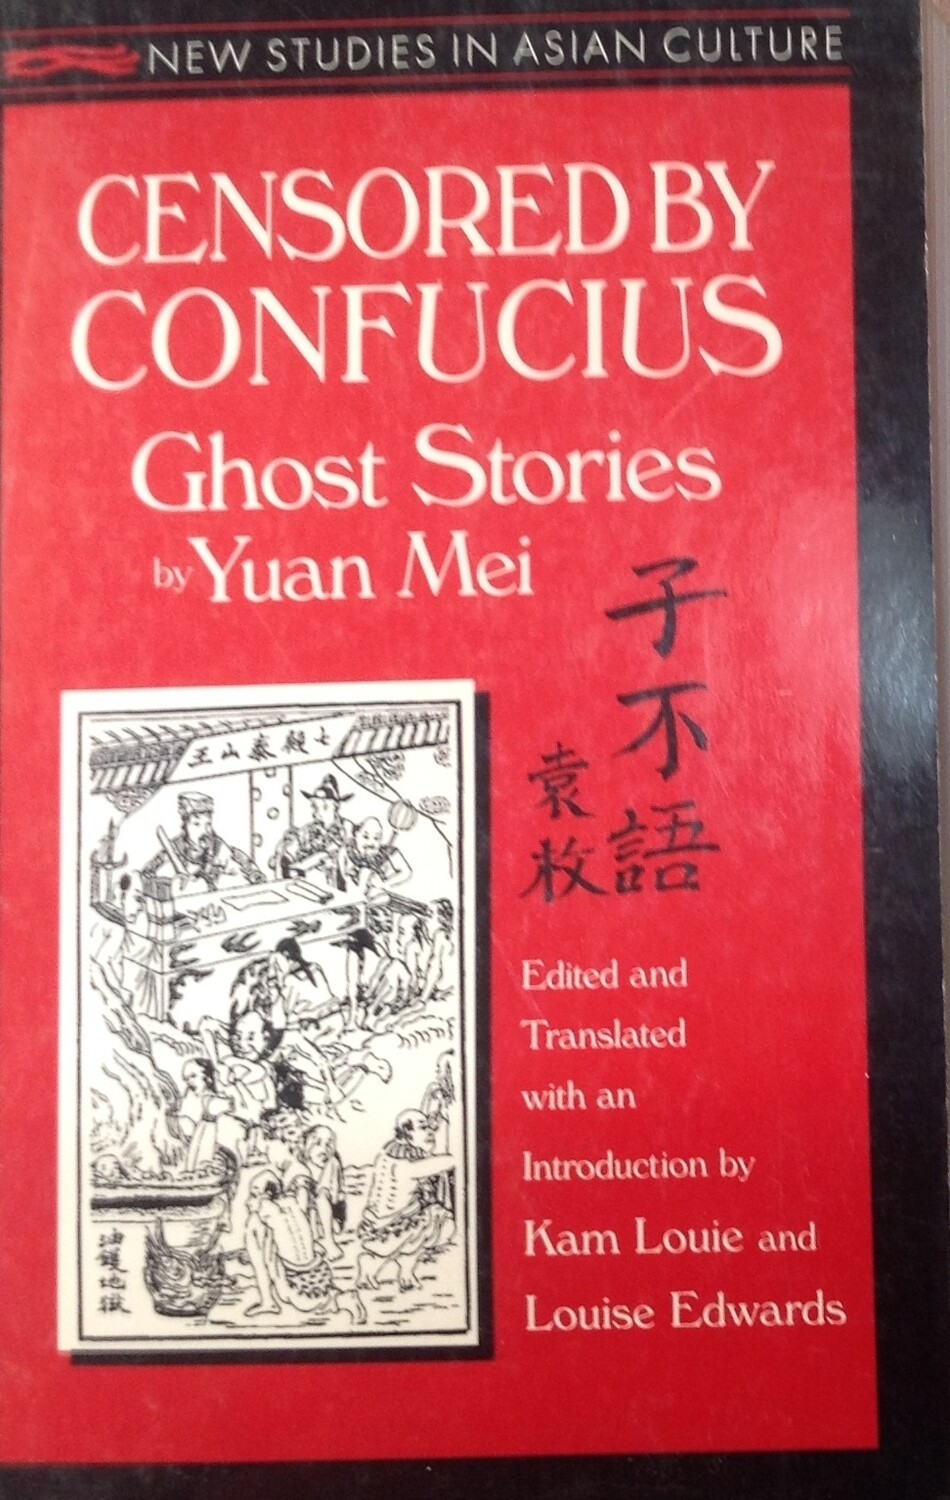 Censored by Confucius. Ghost Stories